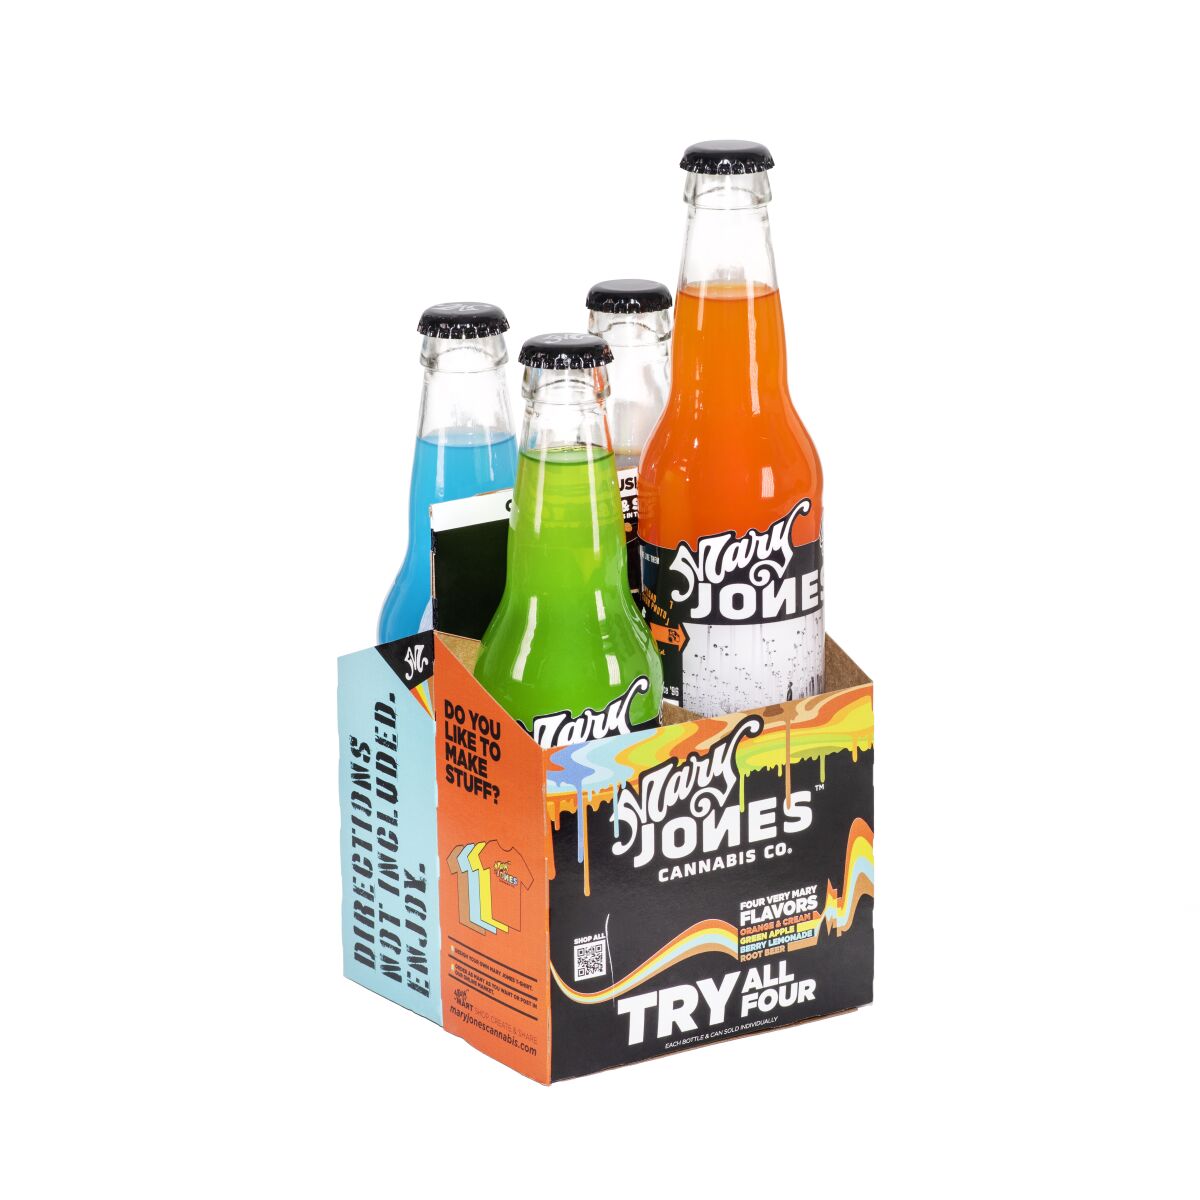 A four-pack of brightly colored soda-like bottles.